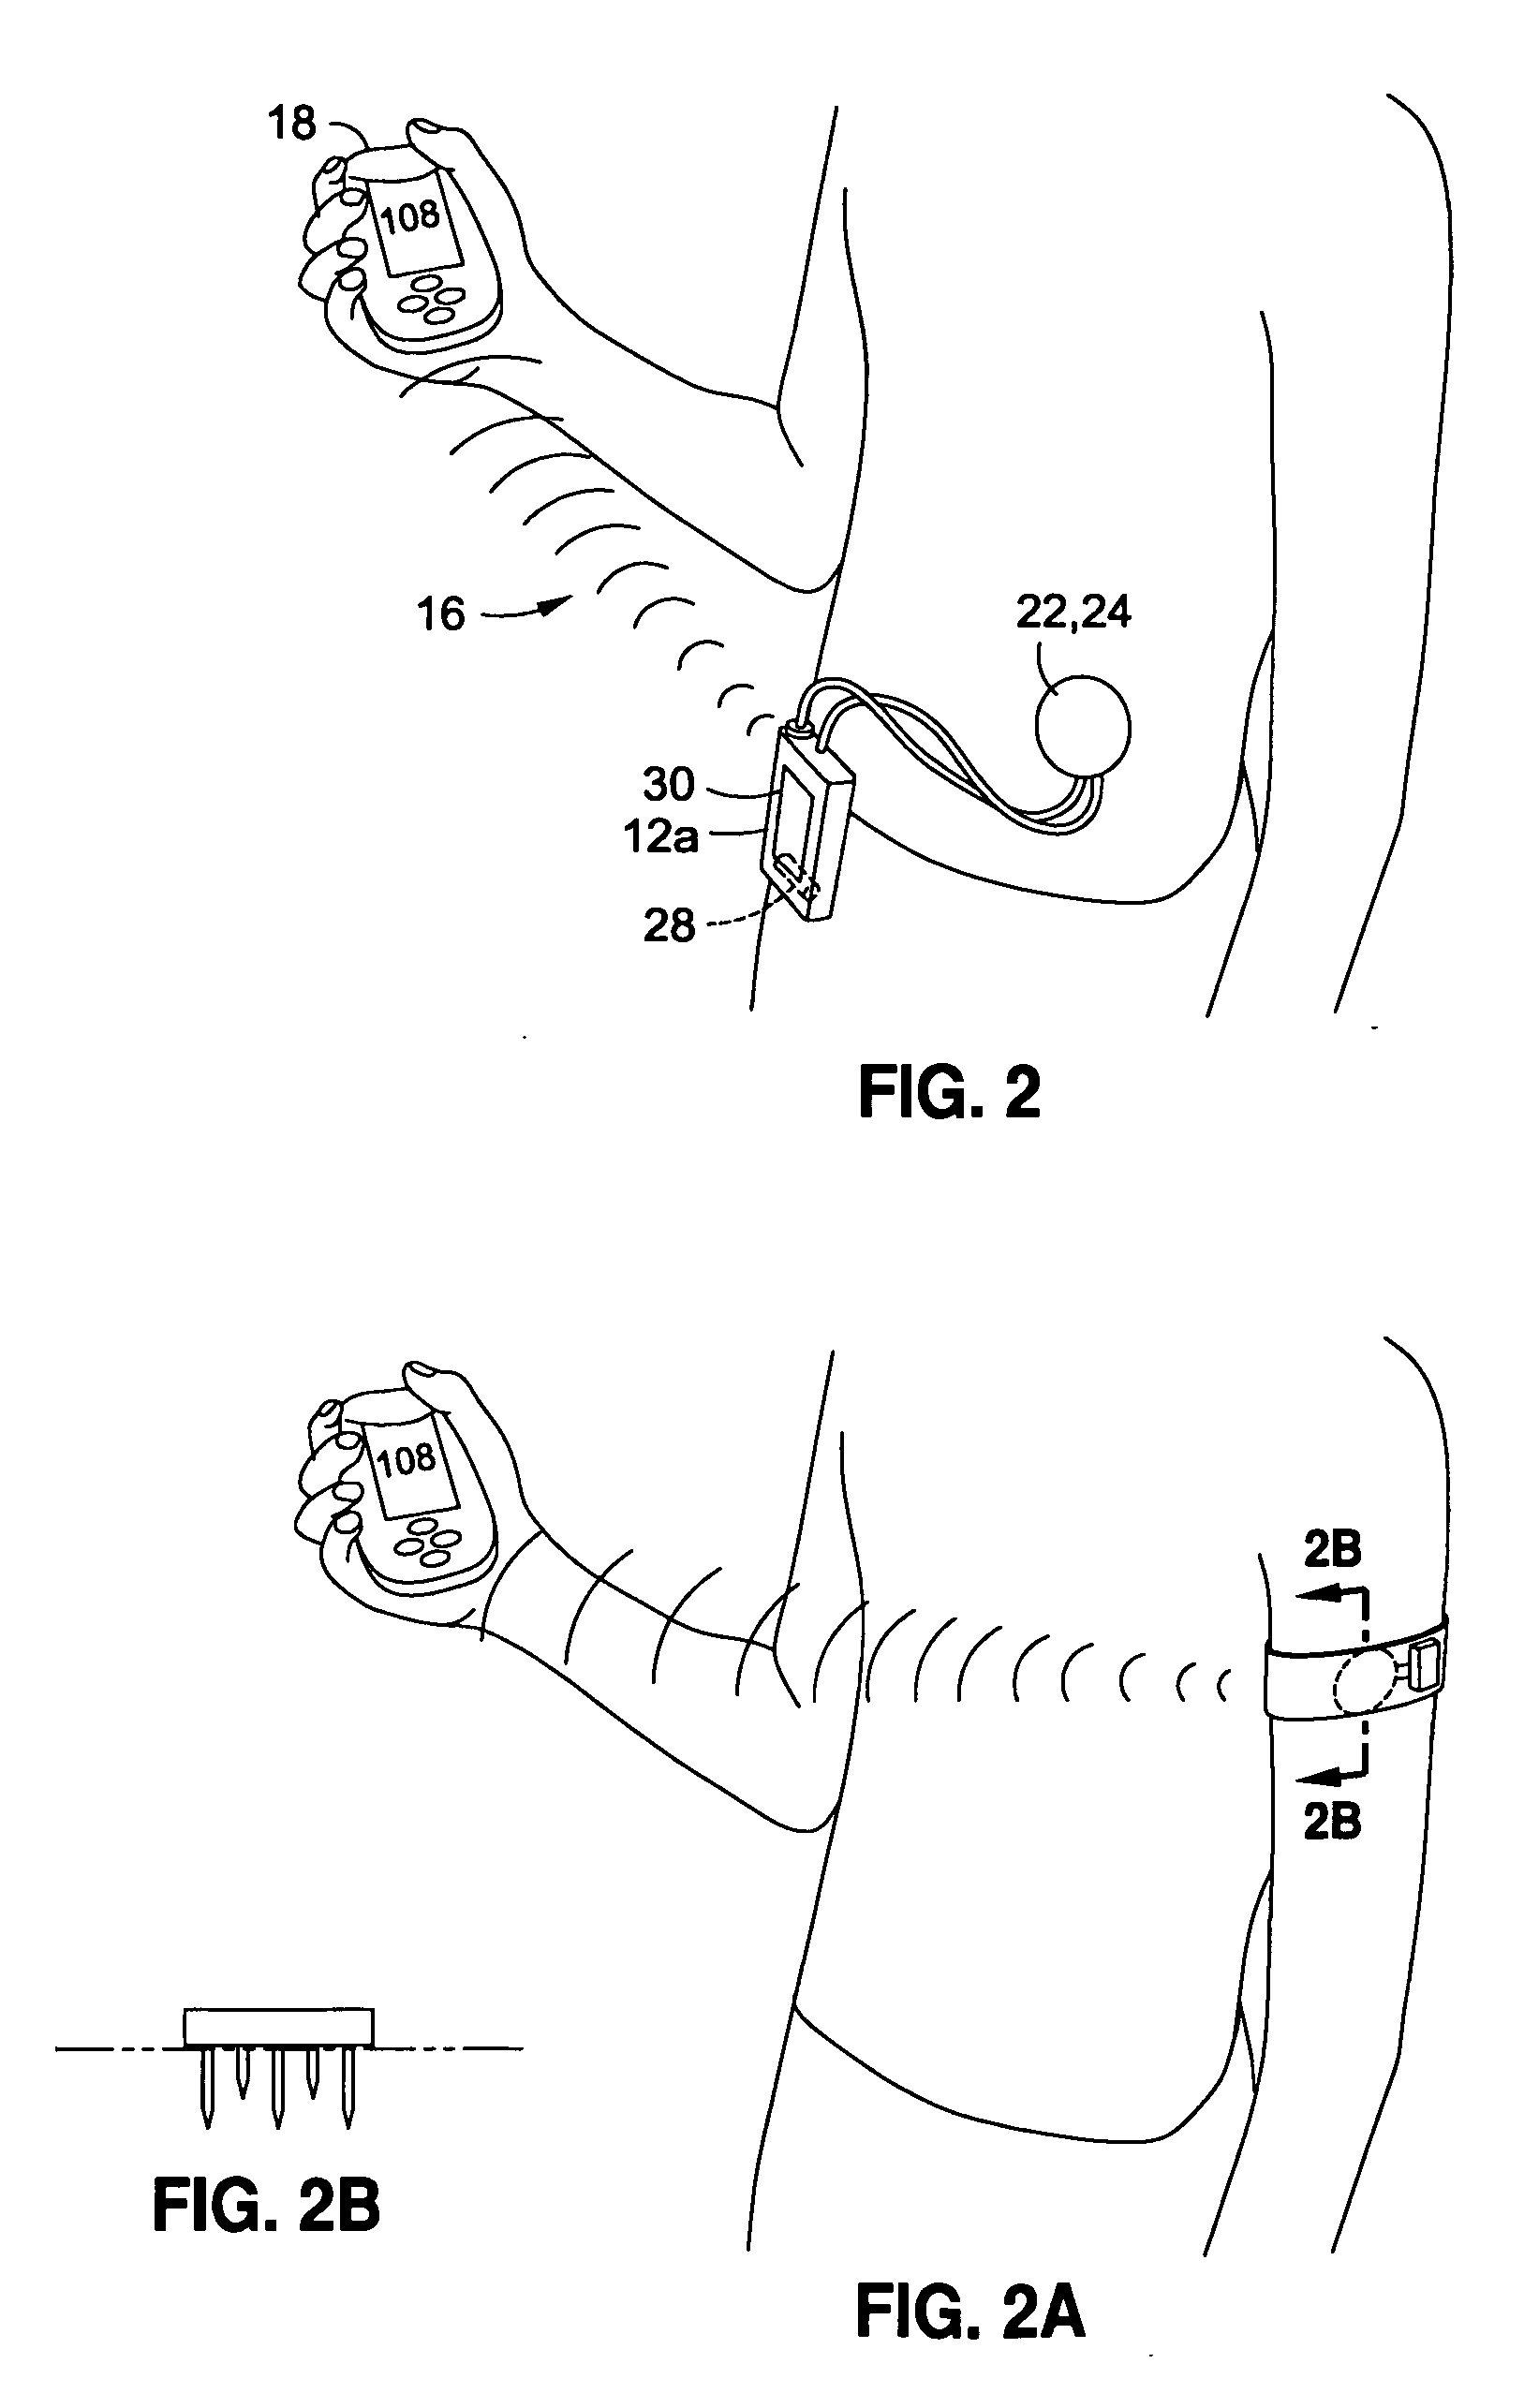 System and method for acquiring and transferring data to a remote server